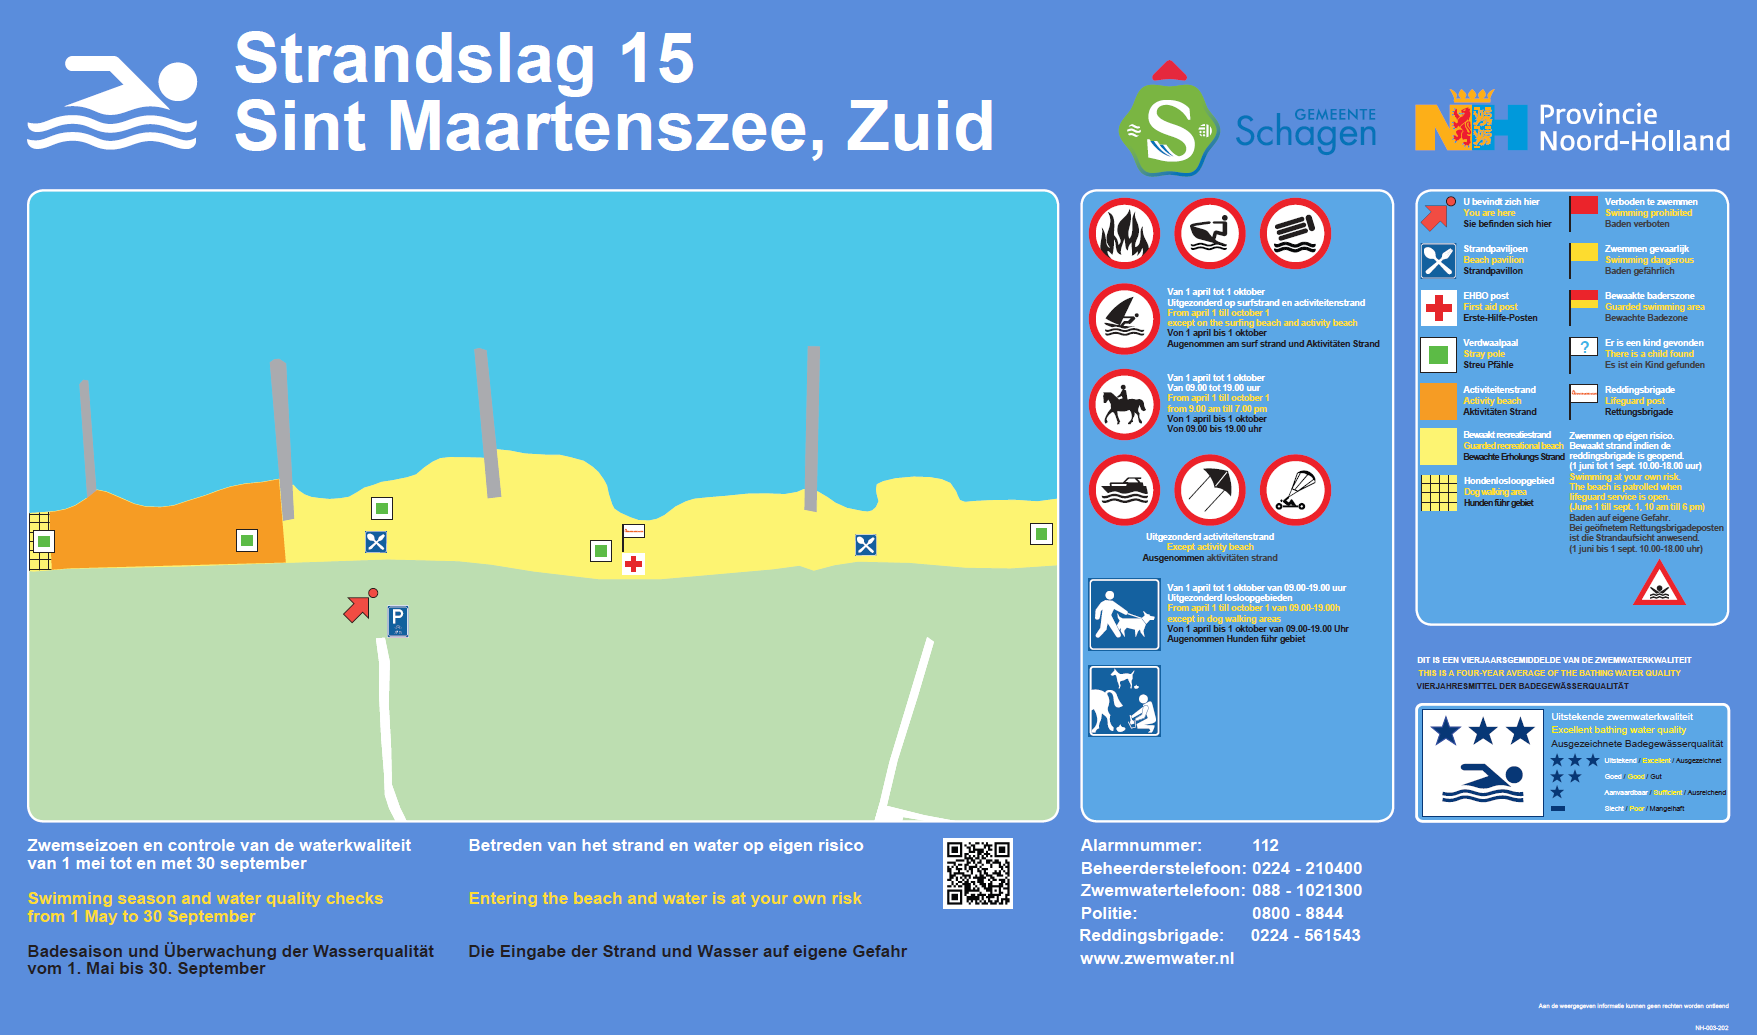 The information board at the swimming location Sint Maartenszee